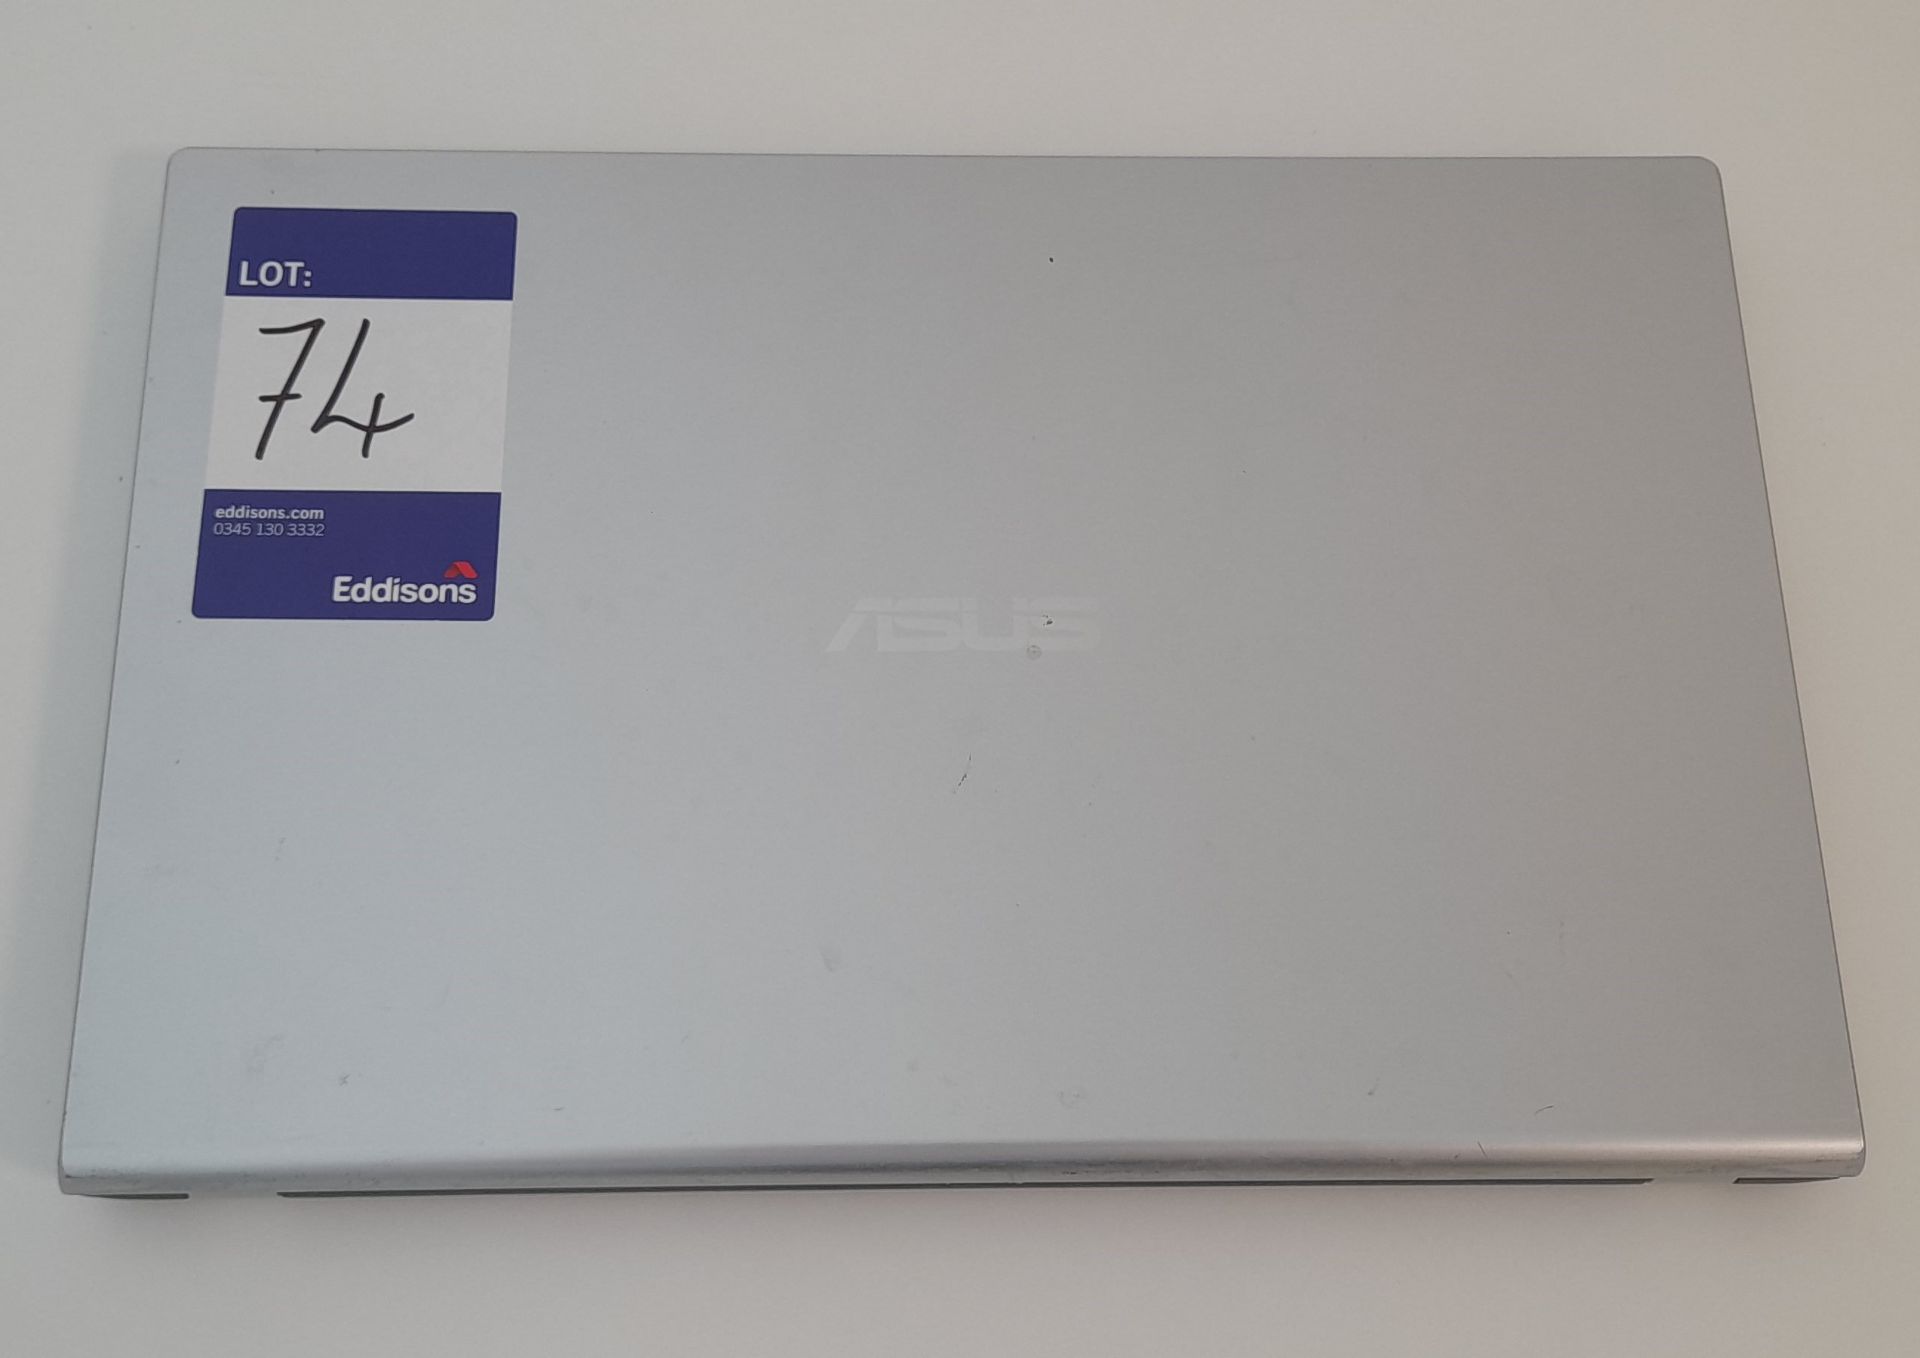 ASUSX515J Notebook PC with intel core i7. Collection from Canary Wharf, London, E14